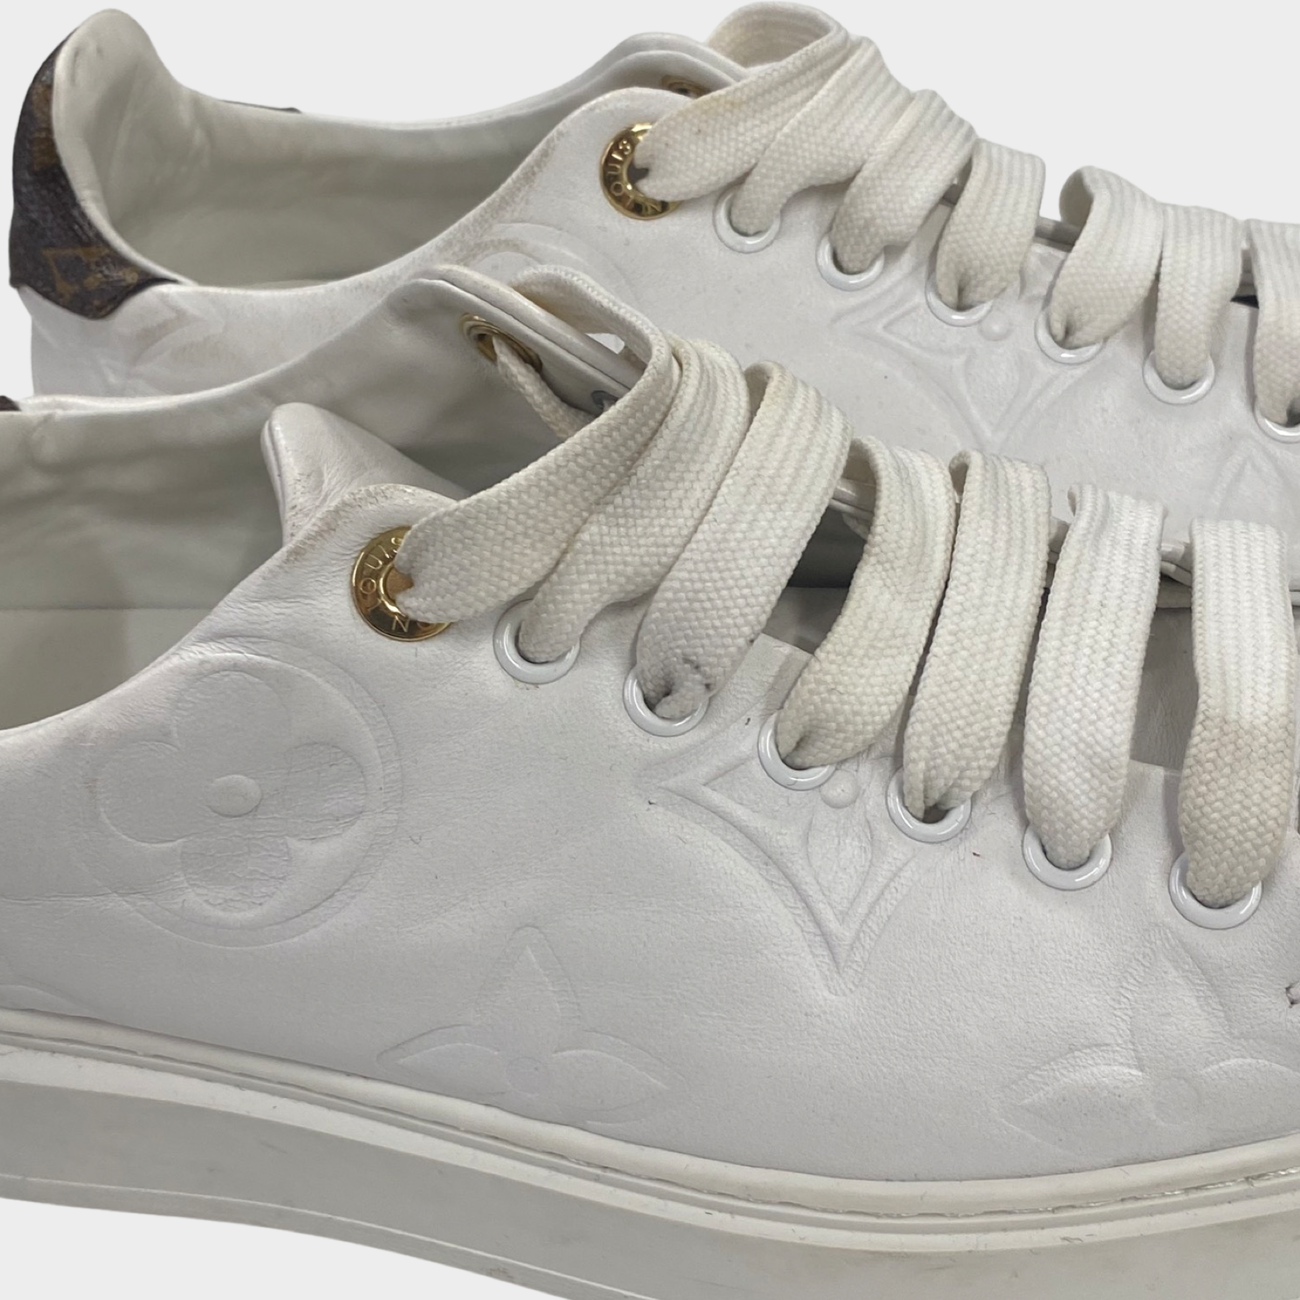 Louis Vuitton New Collection Imported Sneakers